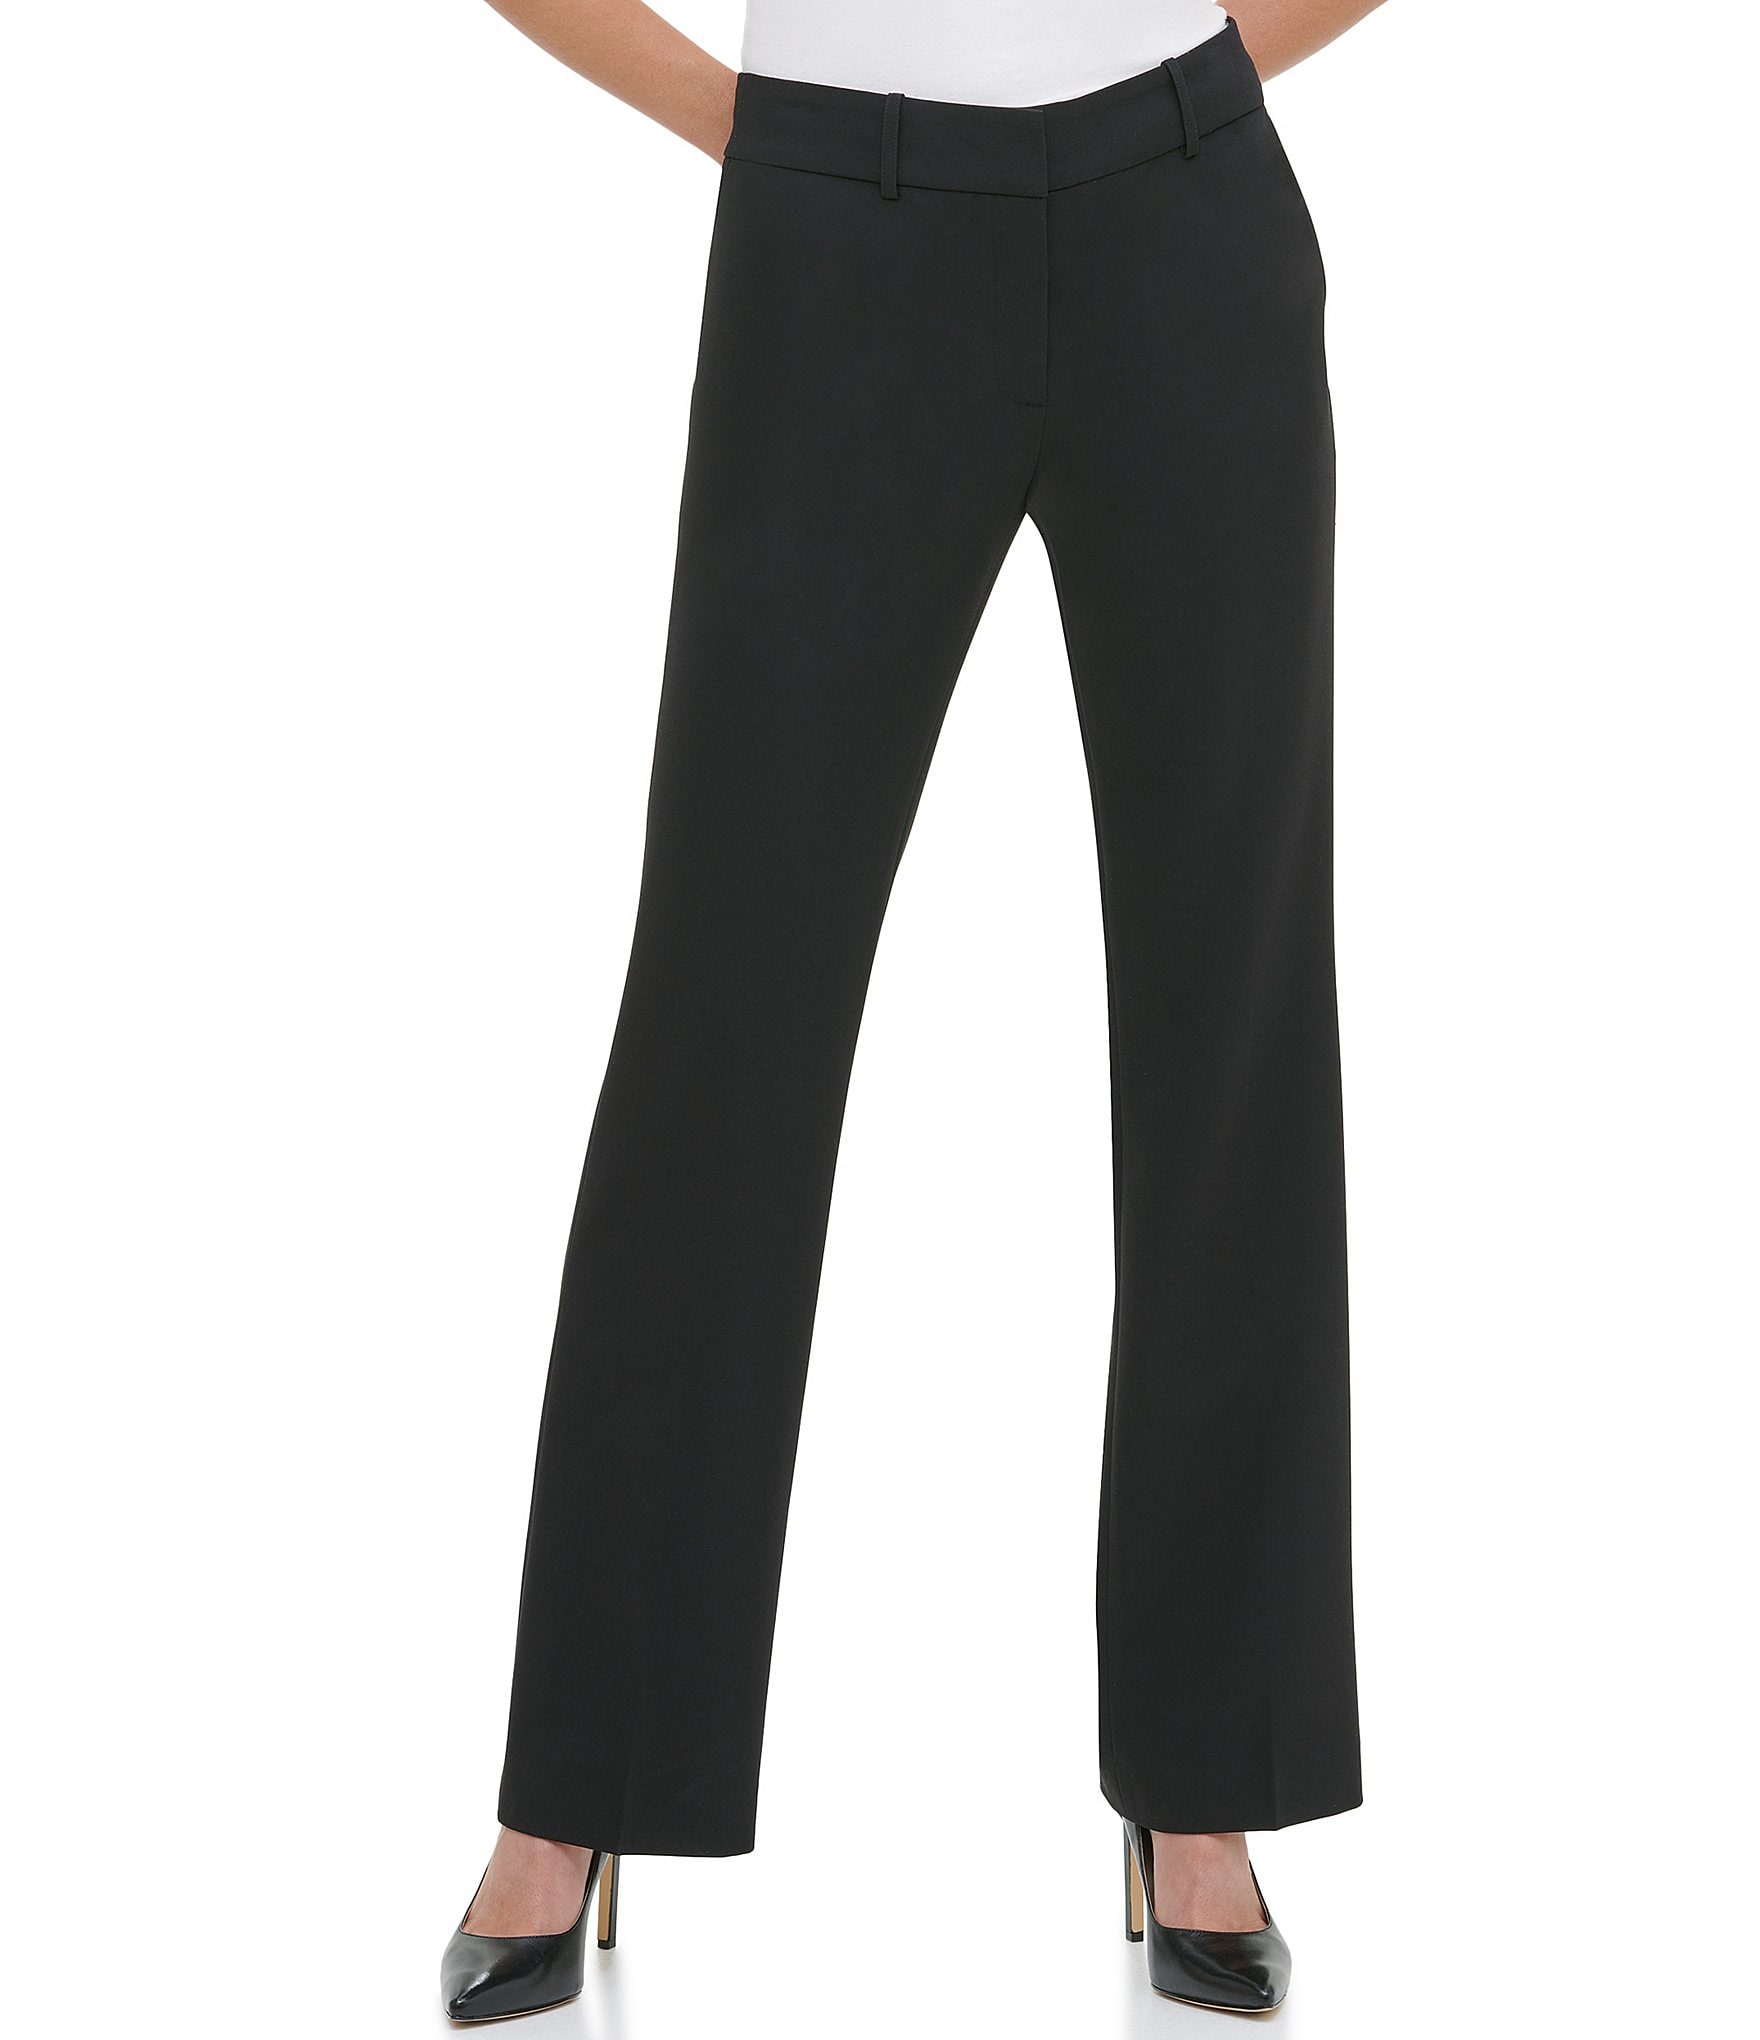 Foucome Dress Pants for Women-Slim Bootcut Stretch High Waist Capris with All Day Comfort Pull On Style 